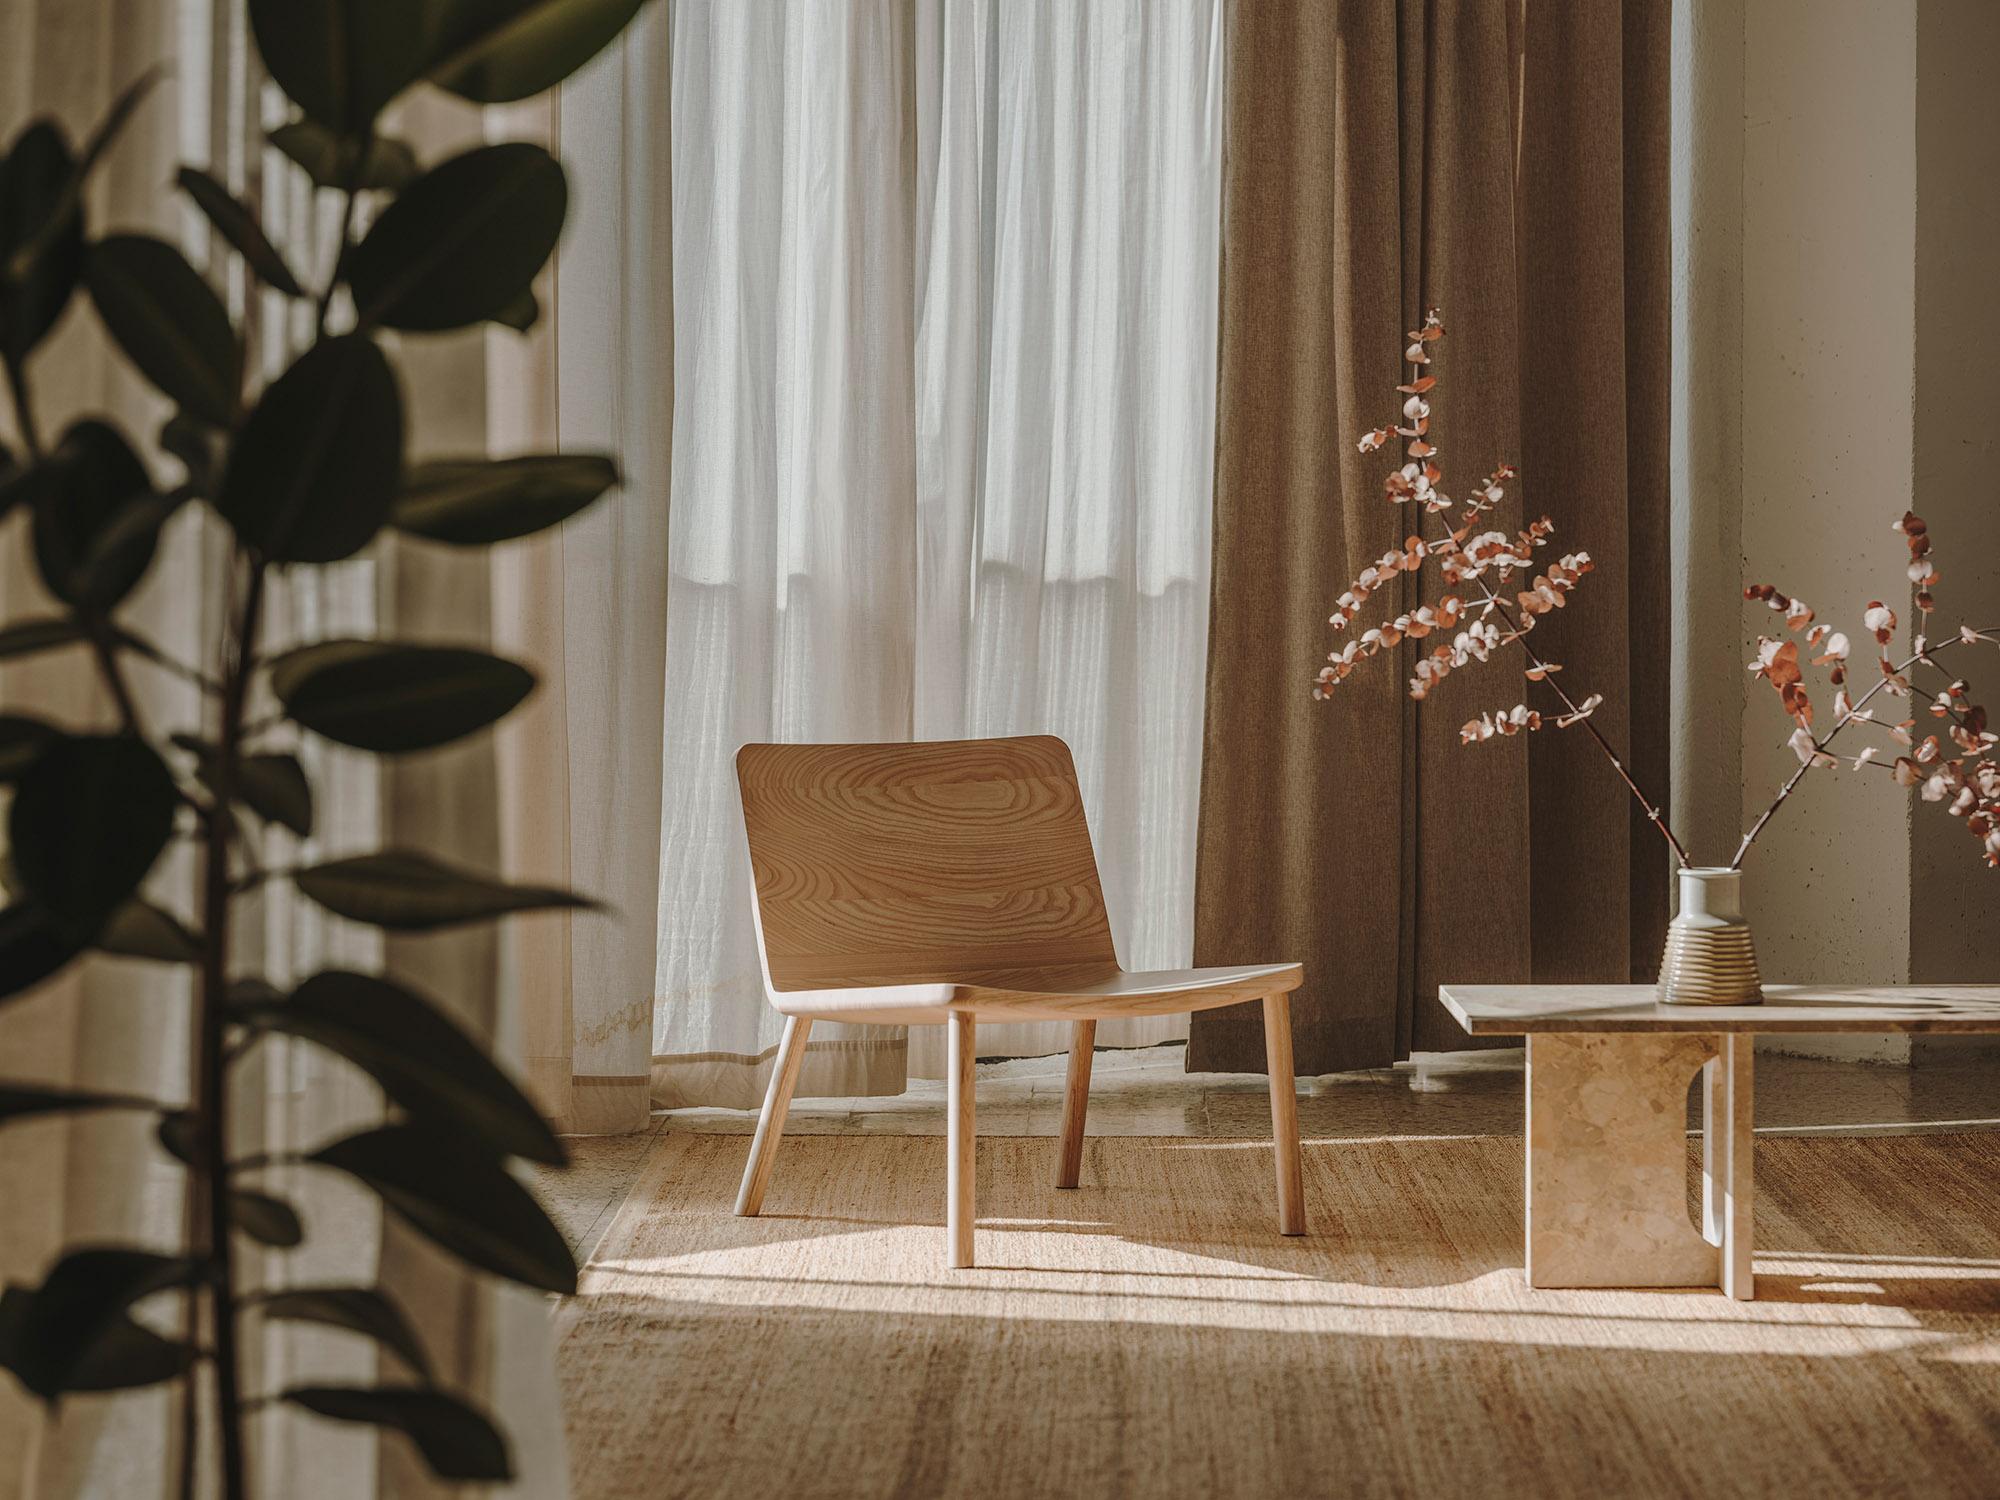 Designed to have a calming and inviting presence, the Allay chair brings together craft and simplicity to create an honest, comfortable and timeless piece. By engaging in the process of subtraction, details are reduced to create a pure and refined